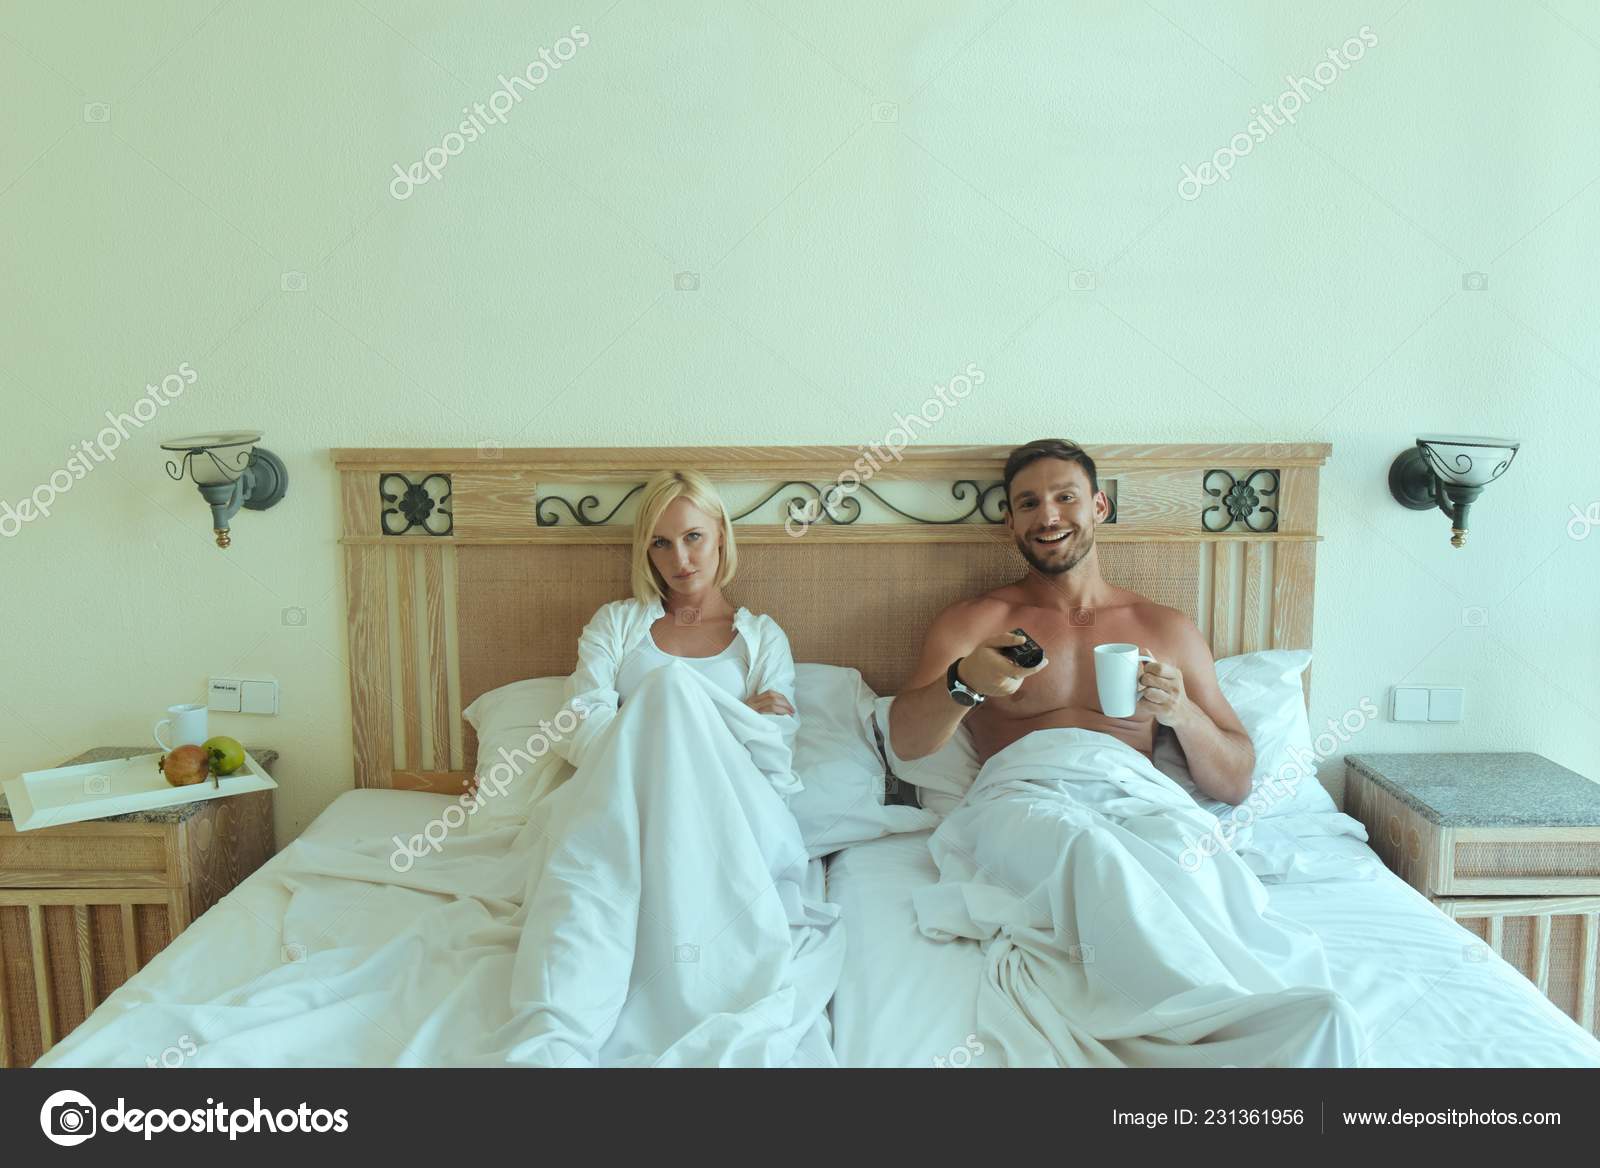 Handsome Man Beautiful Blonde Lying Bed Together Having Lack Communication Stock Photo by ©SuperStock2018 231361956 photo